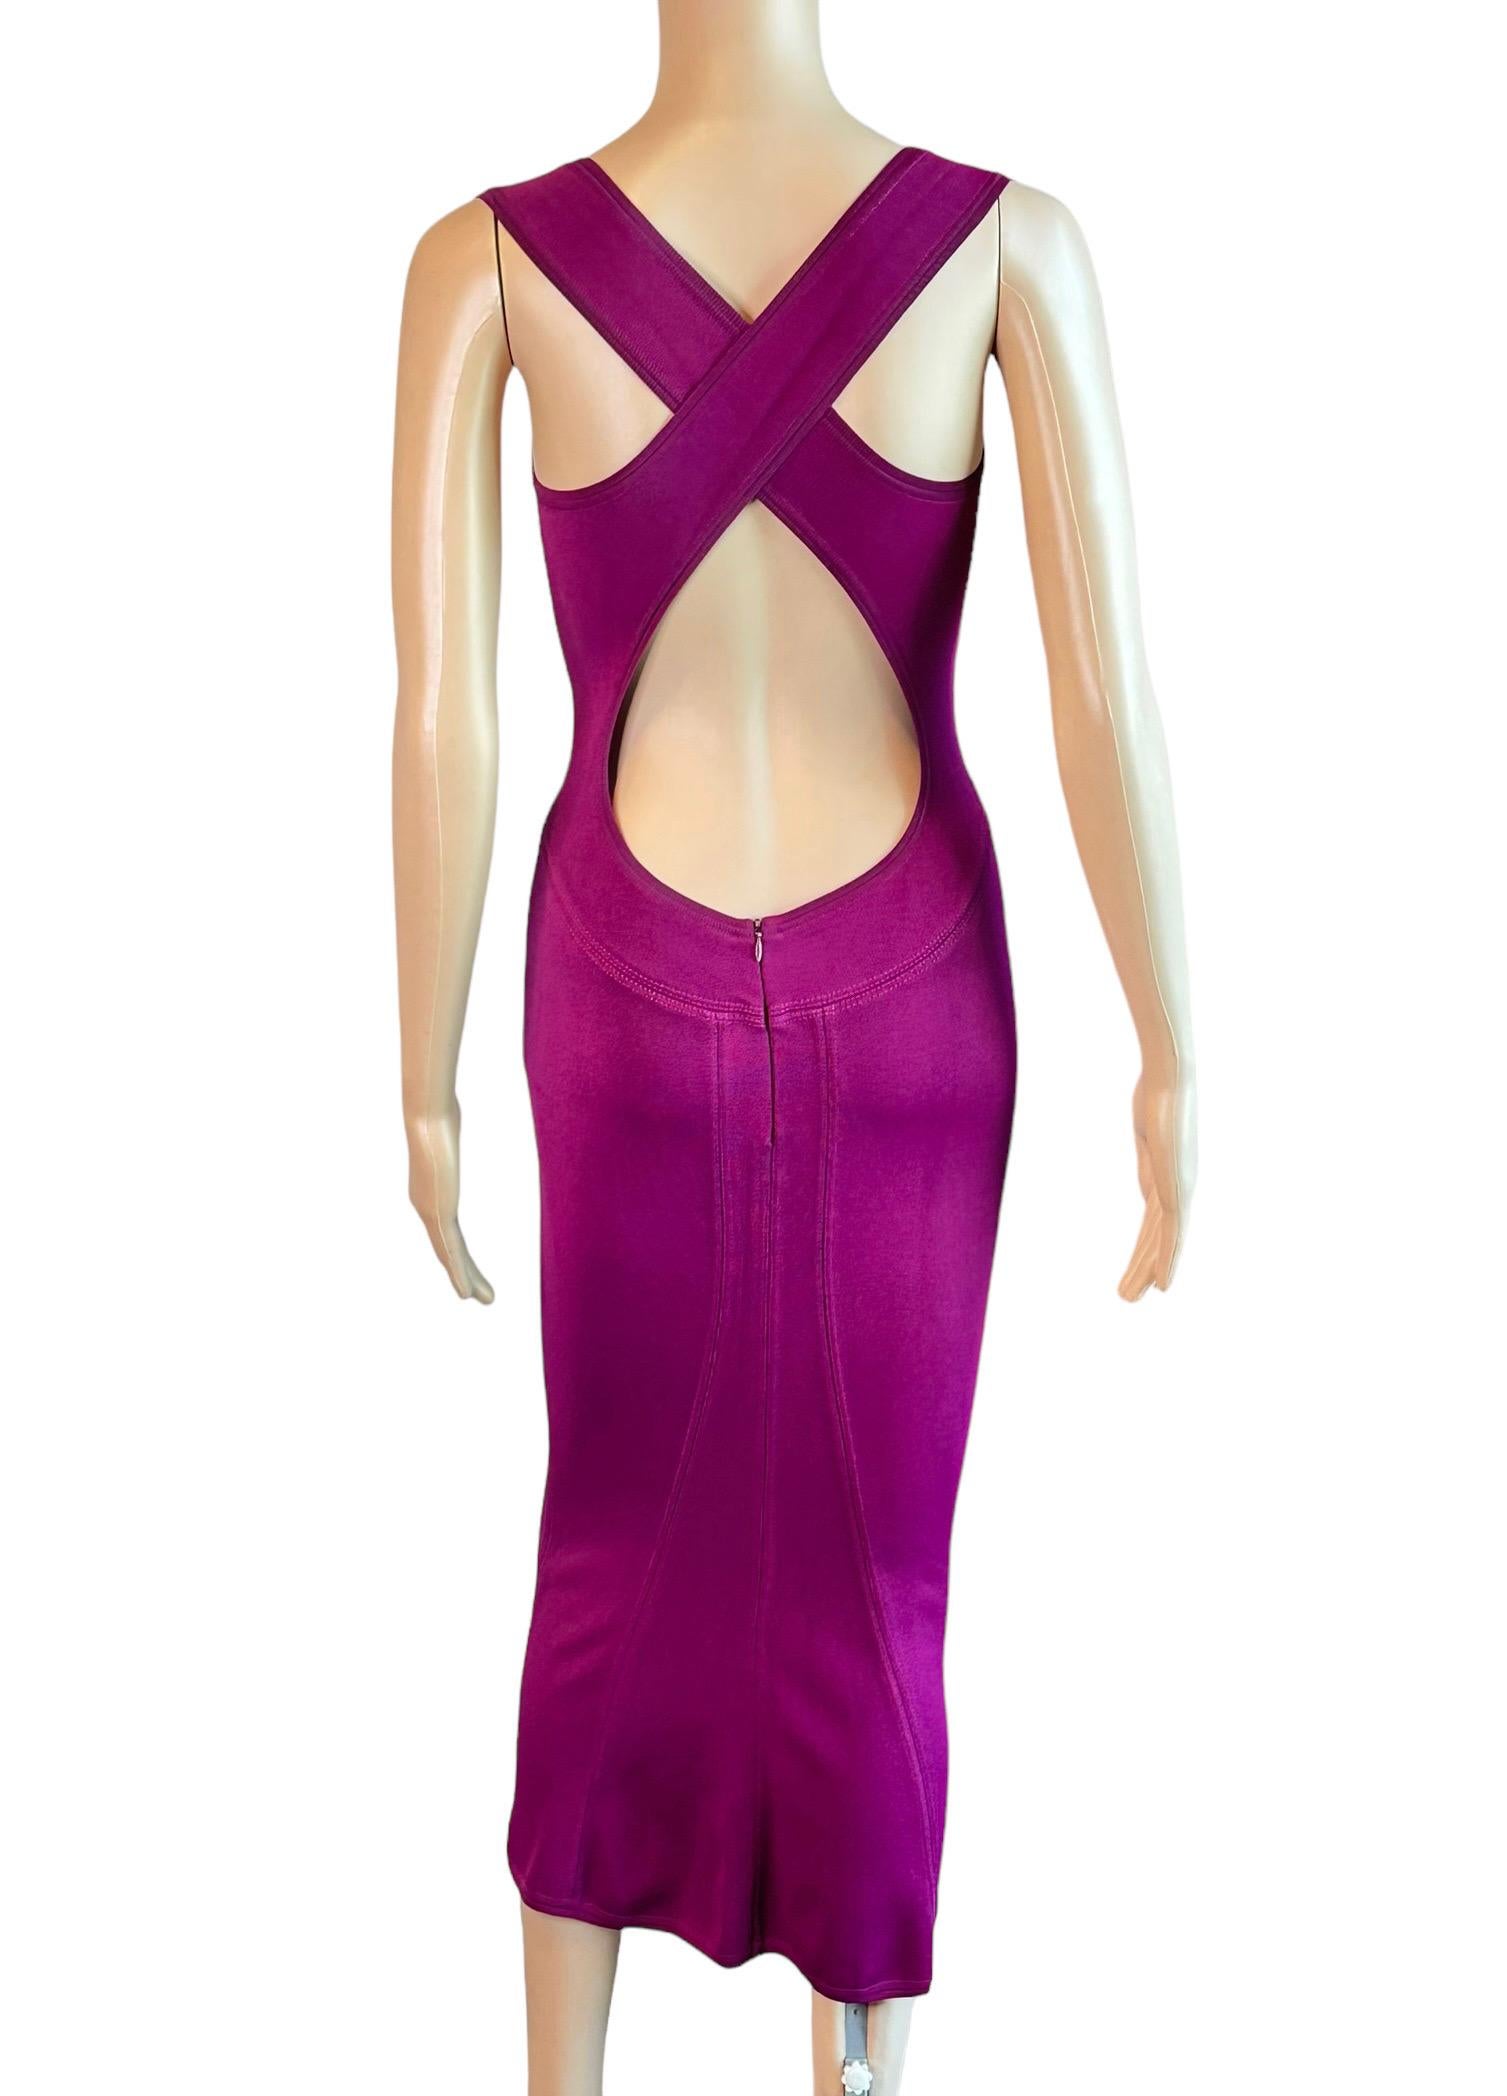 Azzedine Alaia F/W 1992 Runway Vintage Fitted Open Back Midi Dress In Excellent Condition For Sale In Naples, FL